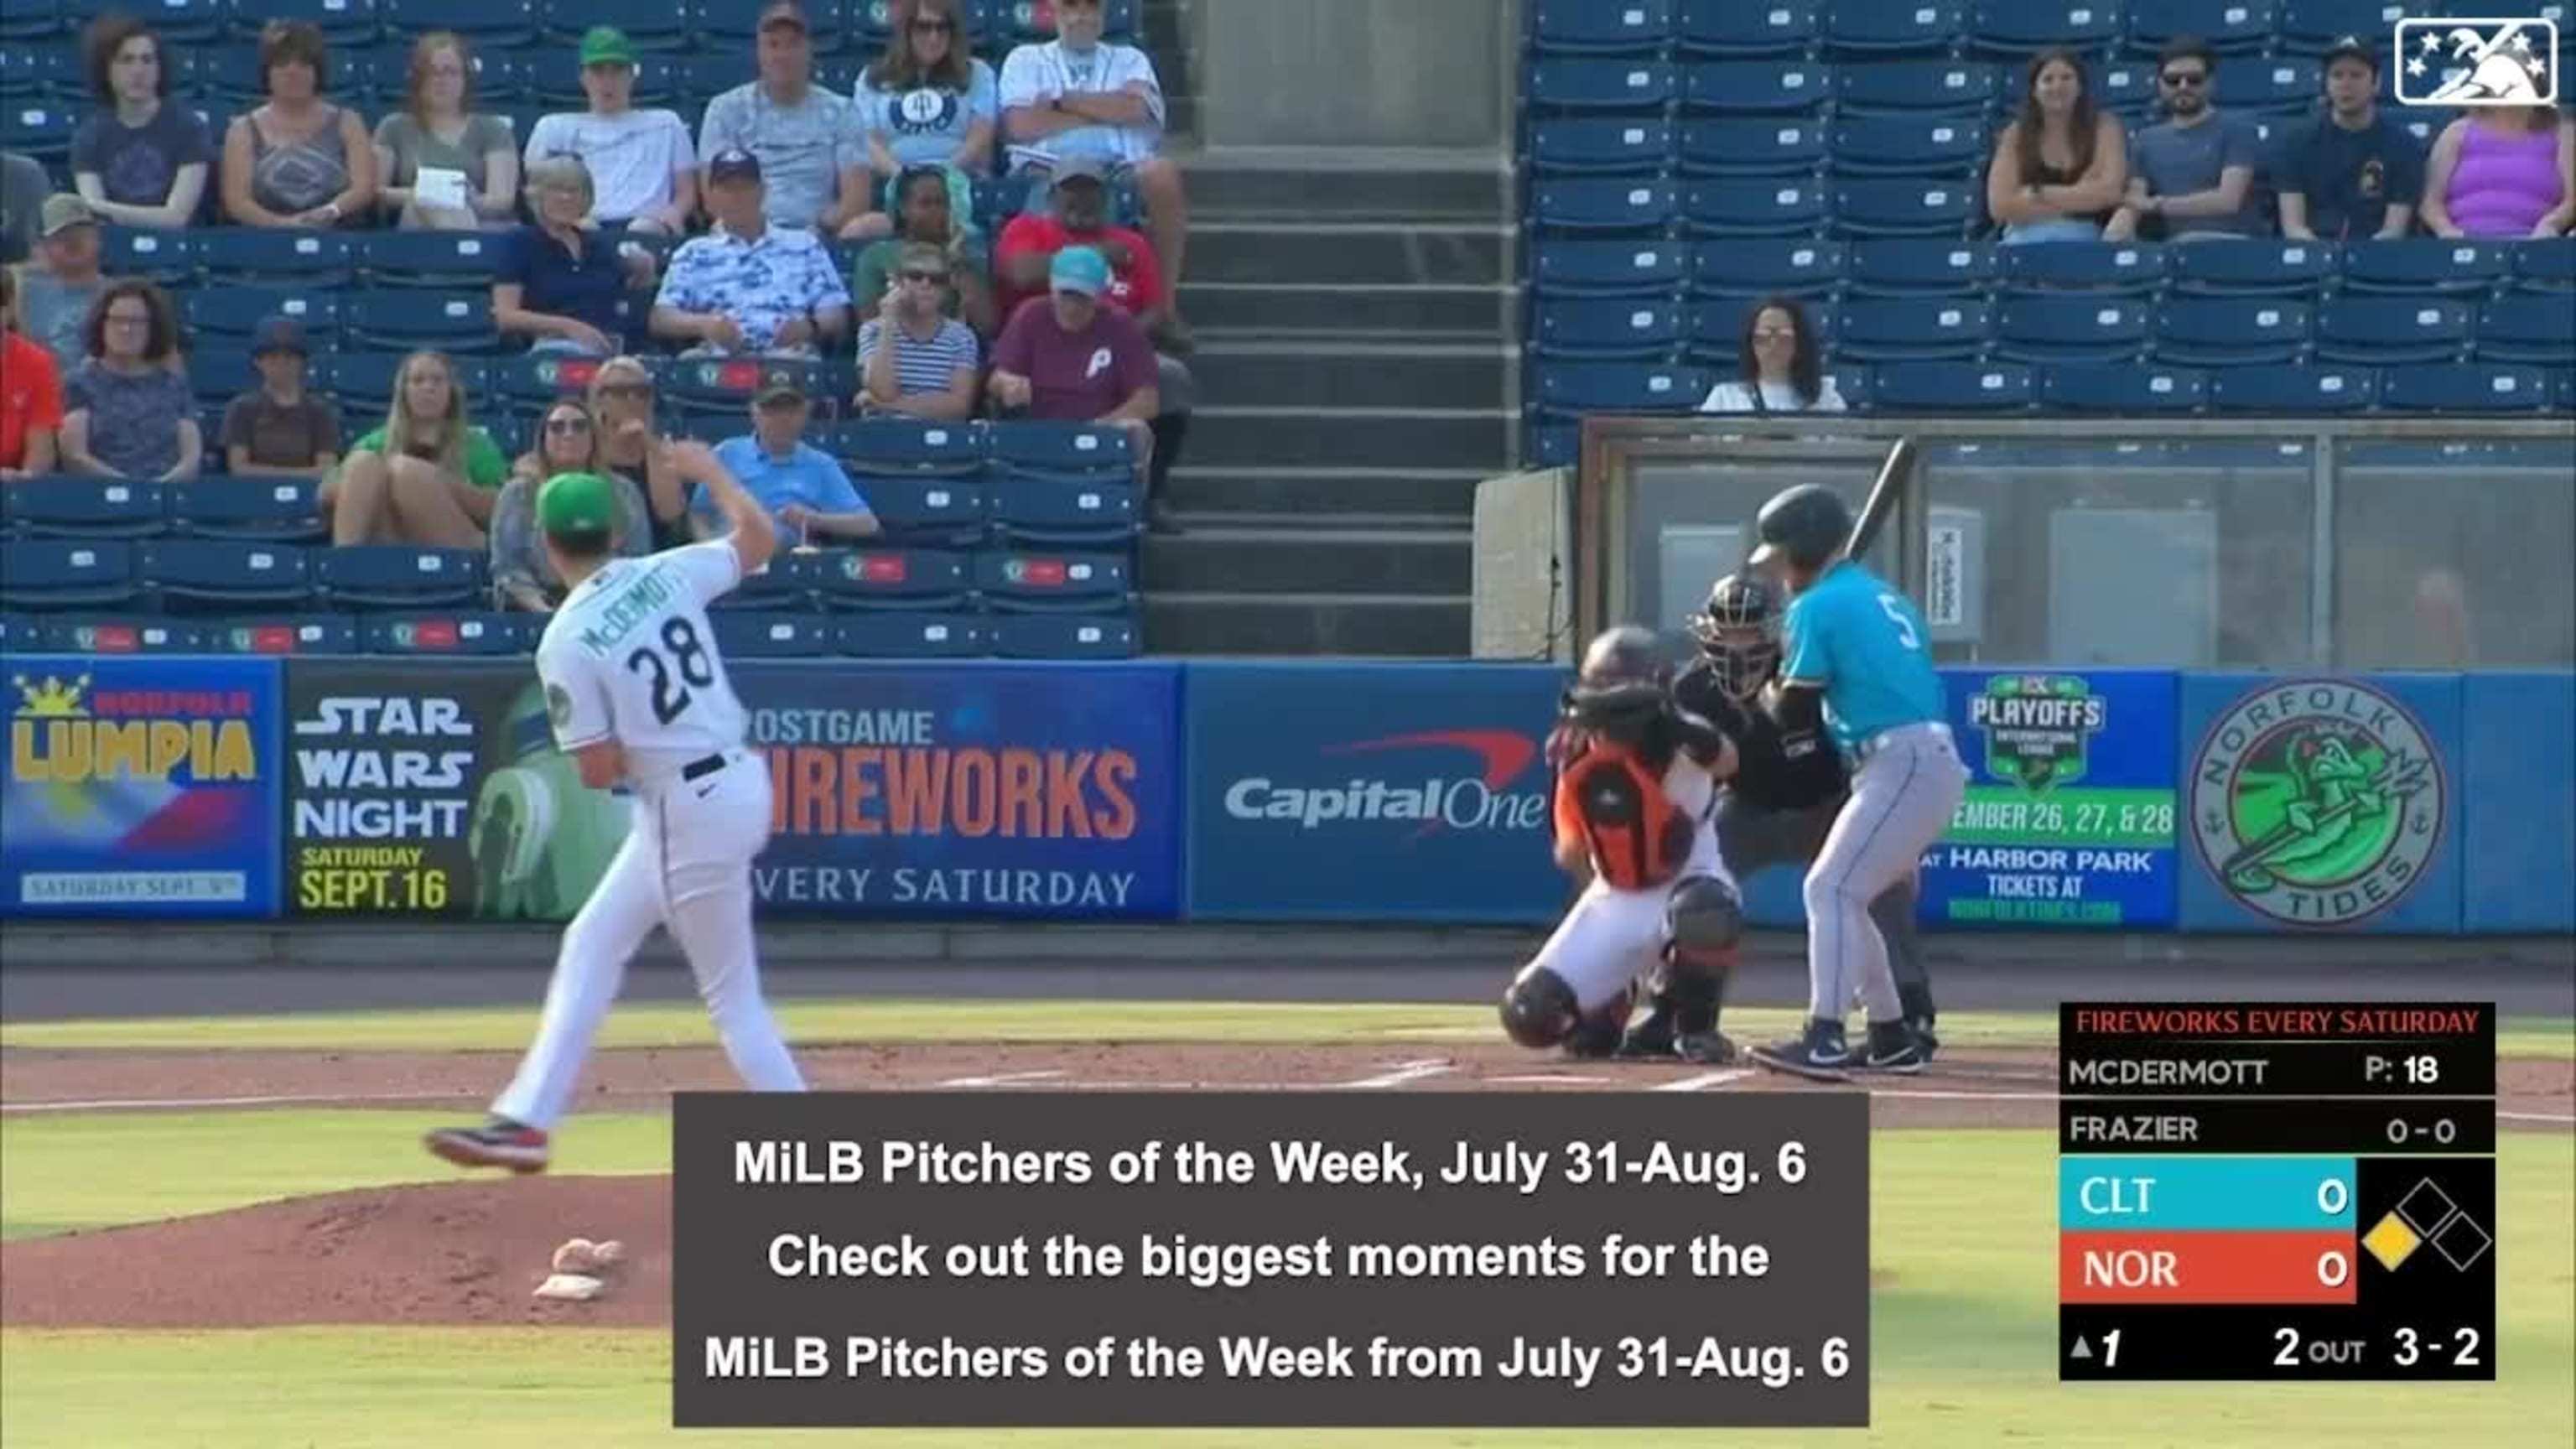 Minor League Players of the Week